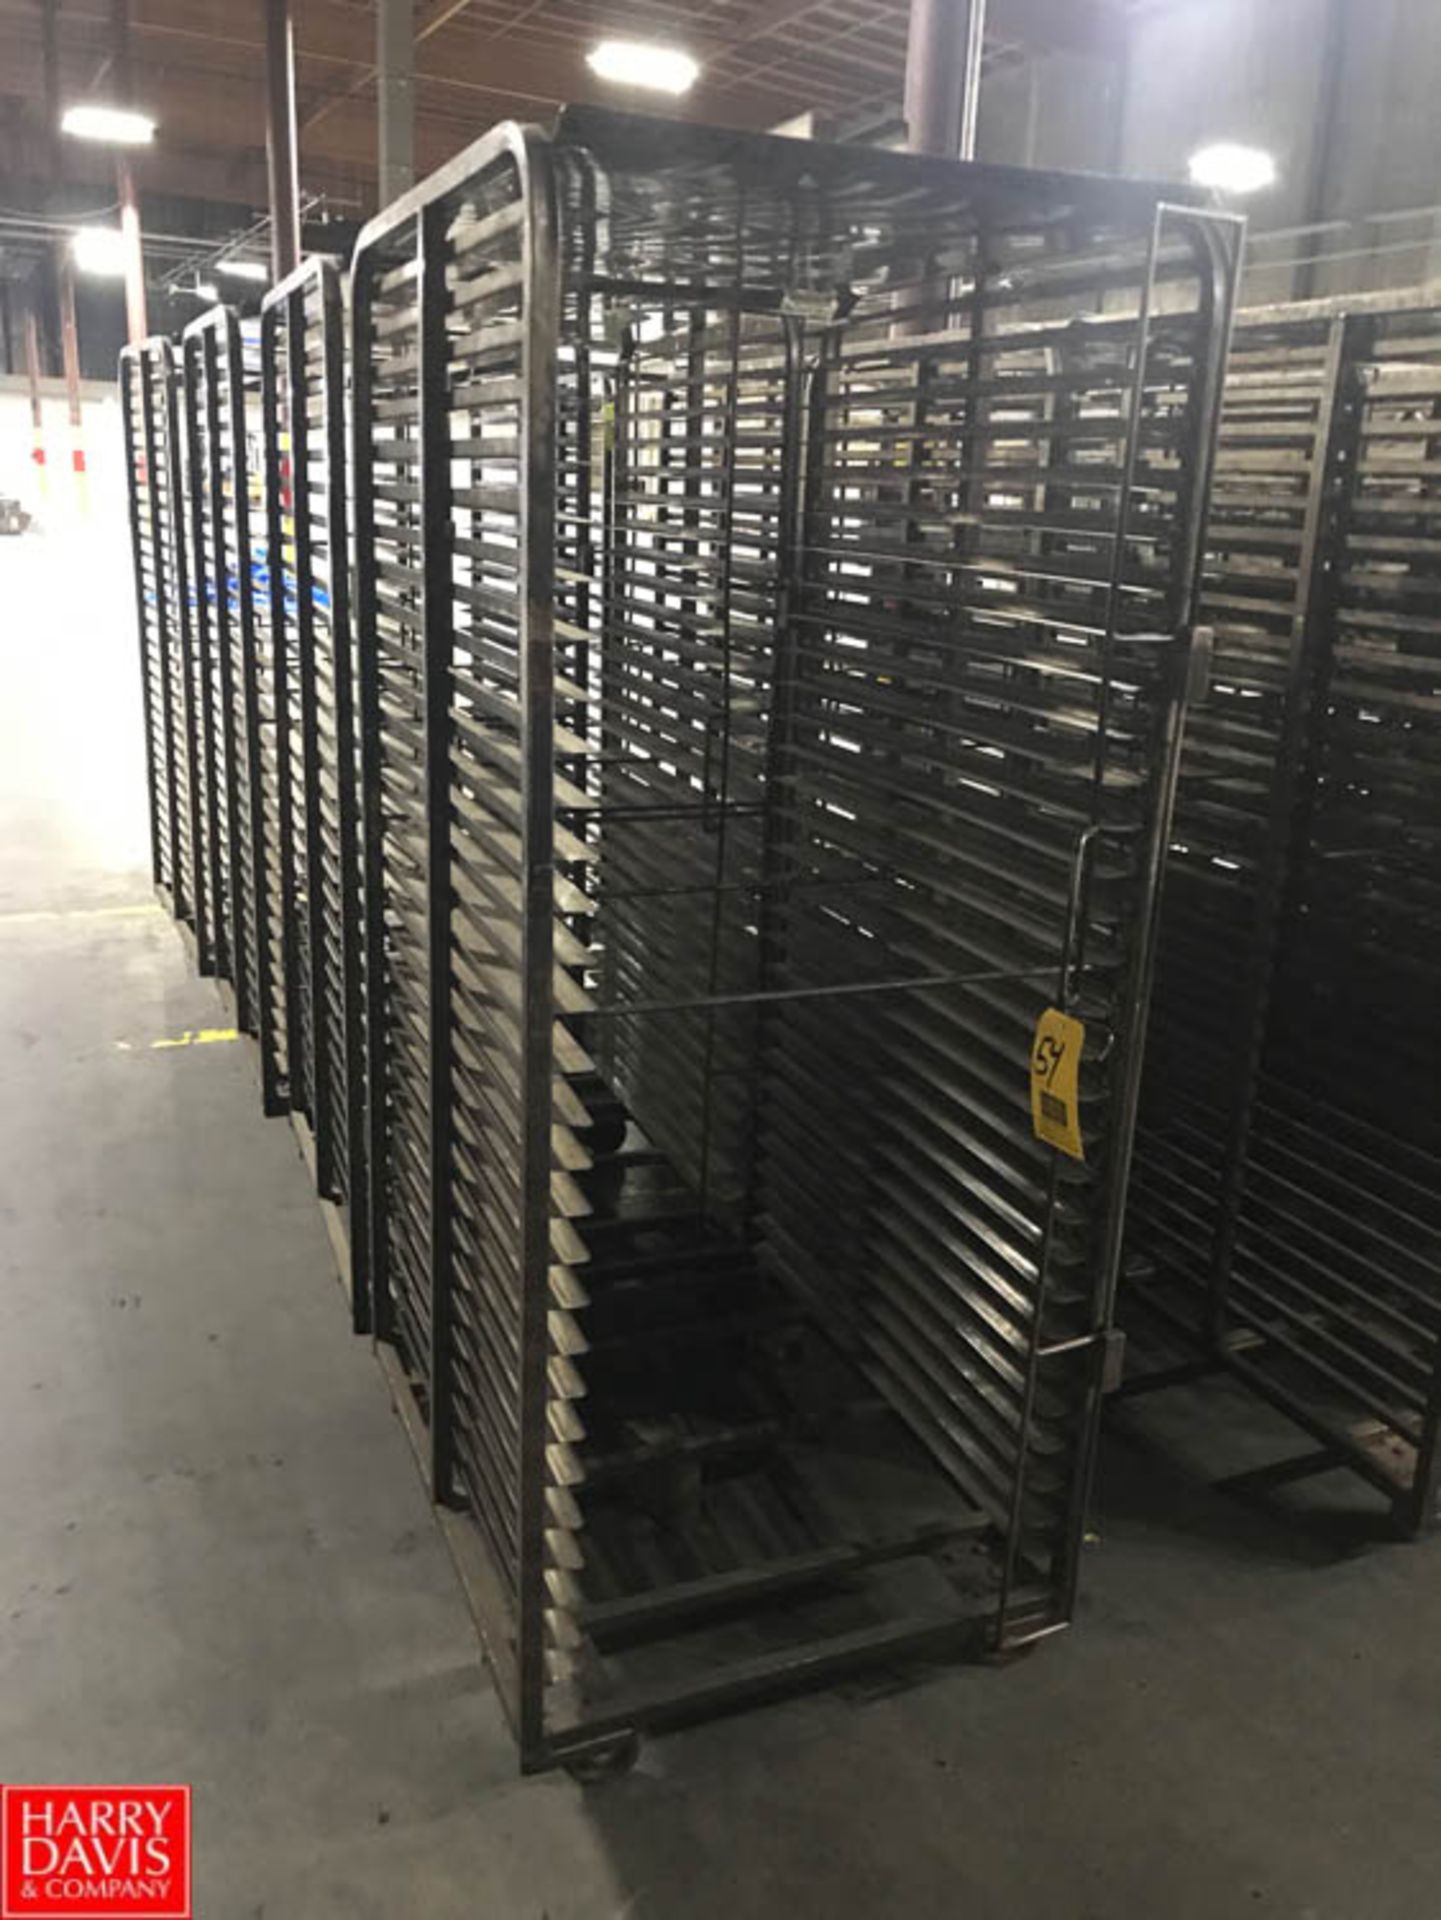 30-Station Tray Cart Rigging Fee: 50, PLEASE NOTE: Your bids are multiplied by the quantity of